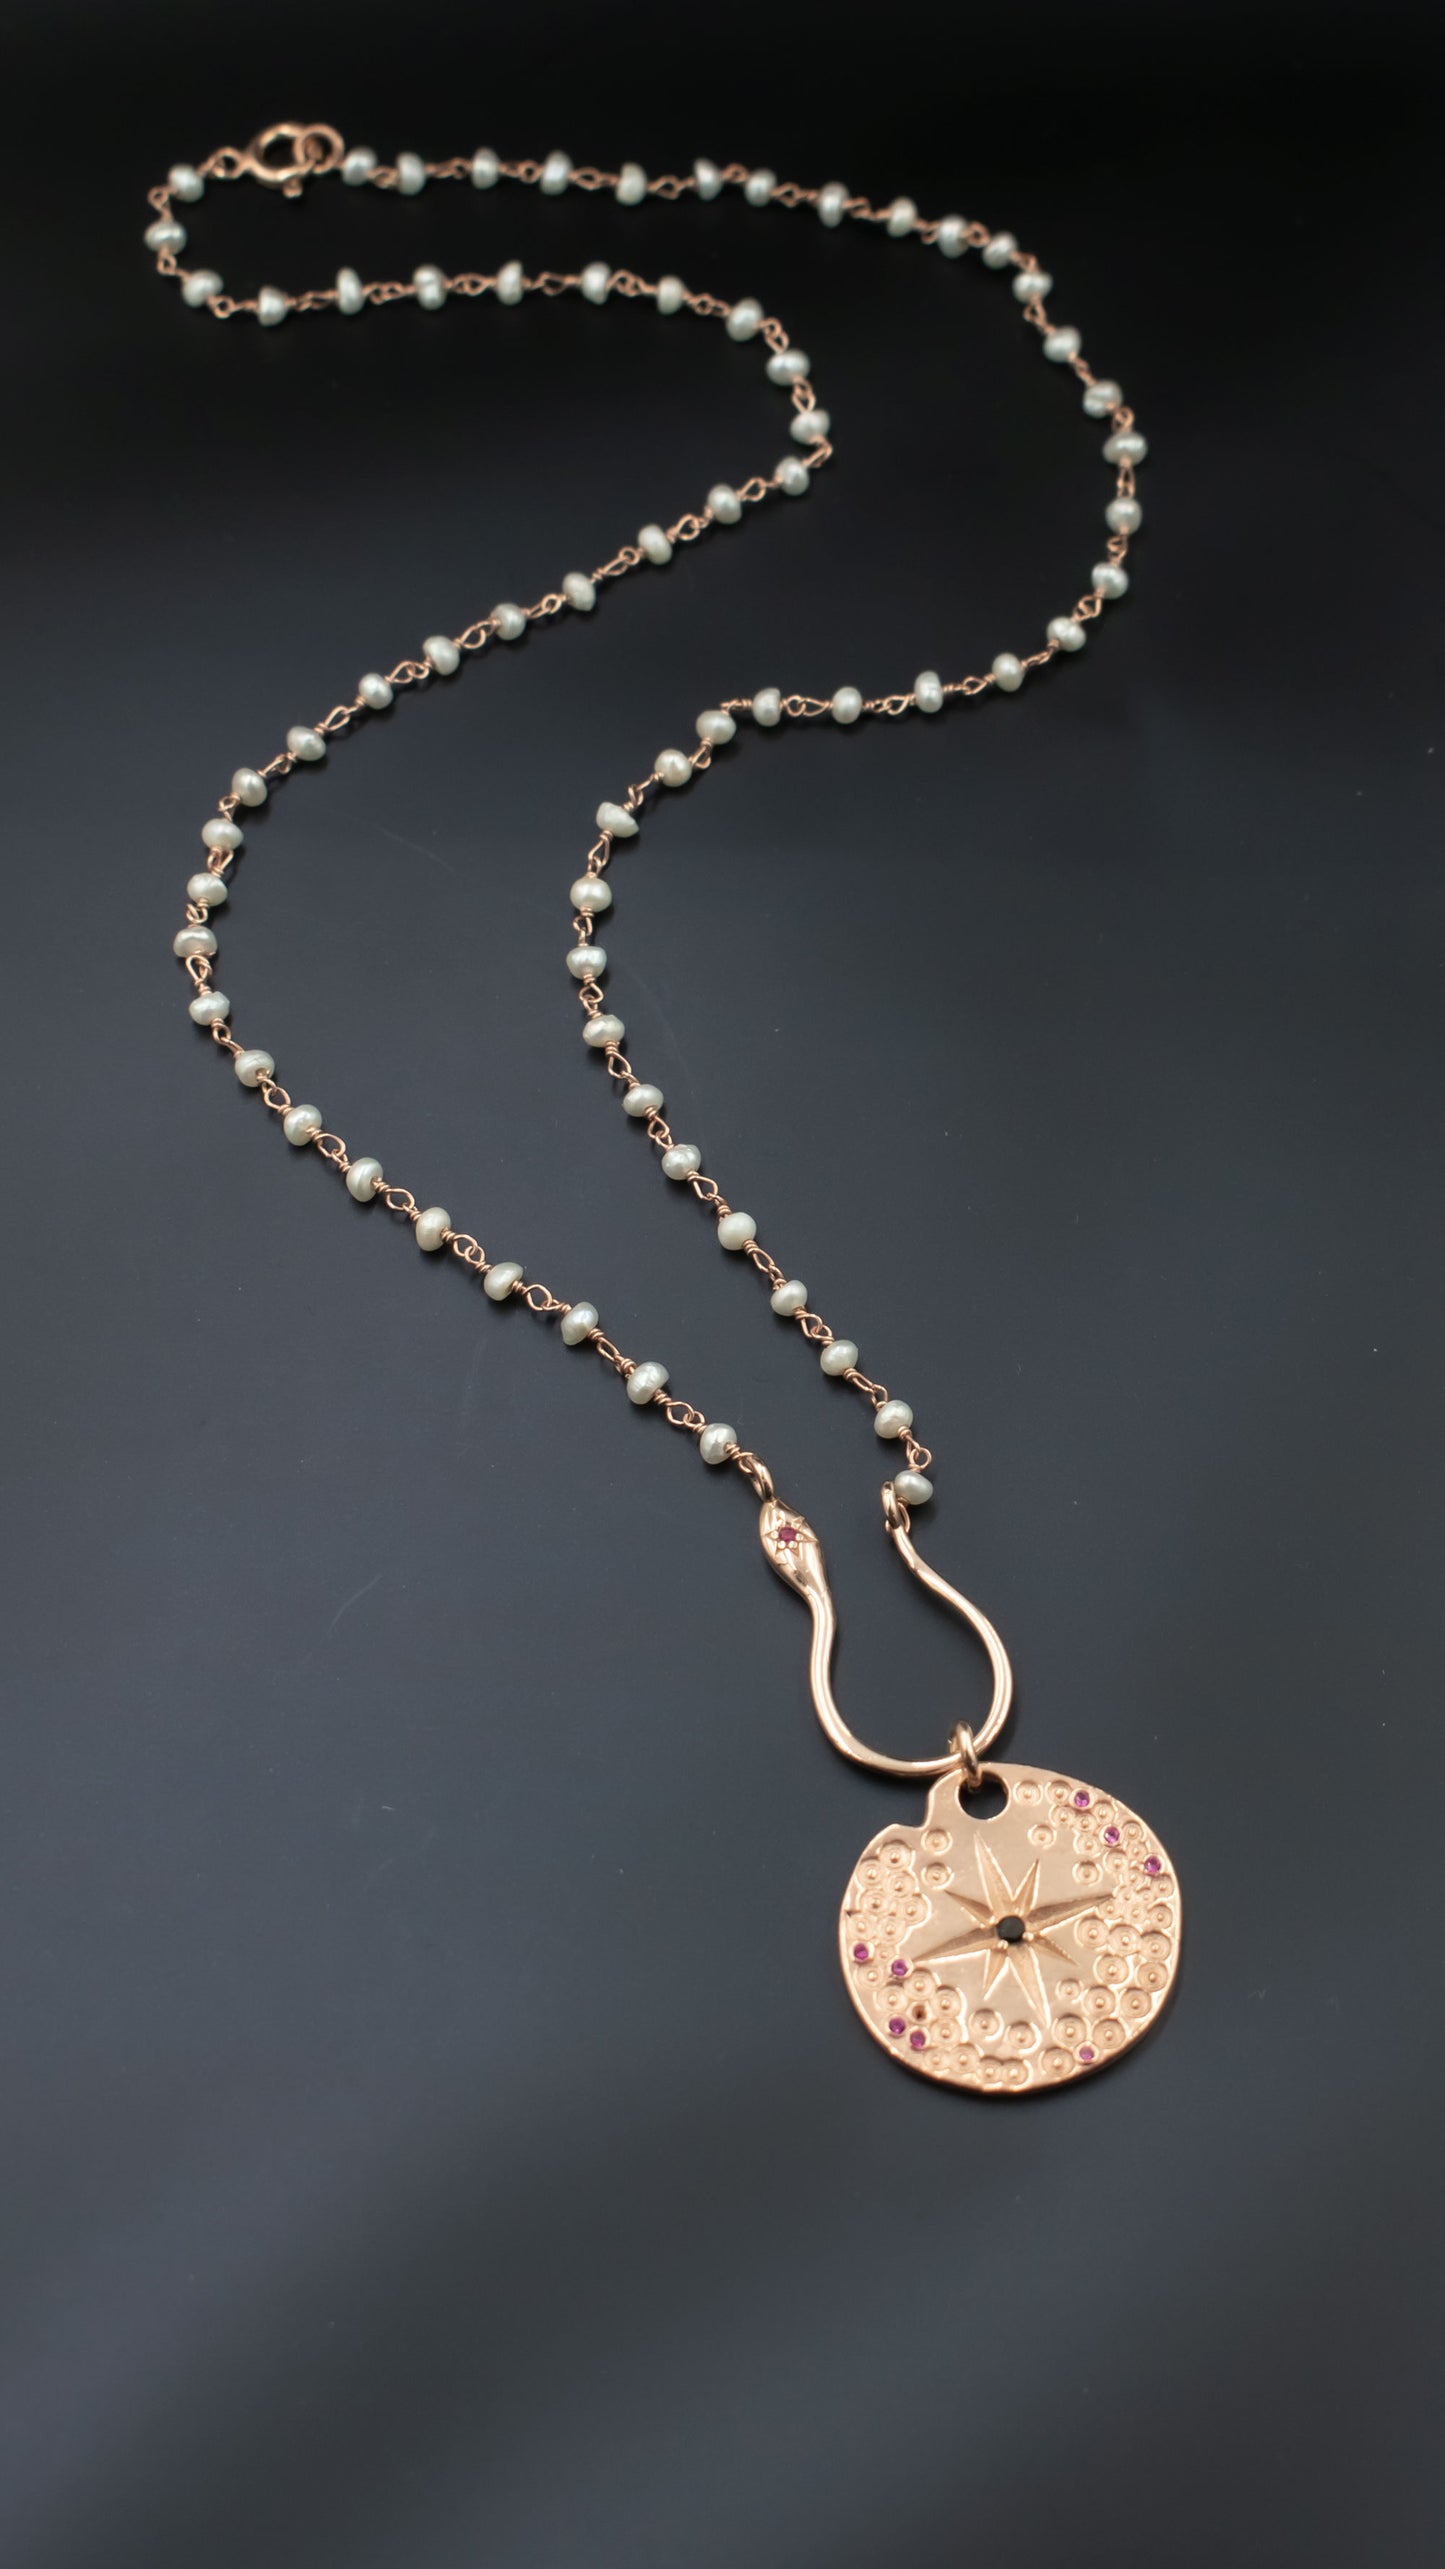 Zodiac sign pendant on a beautiful pearl necklace